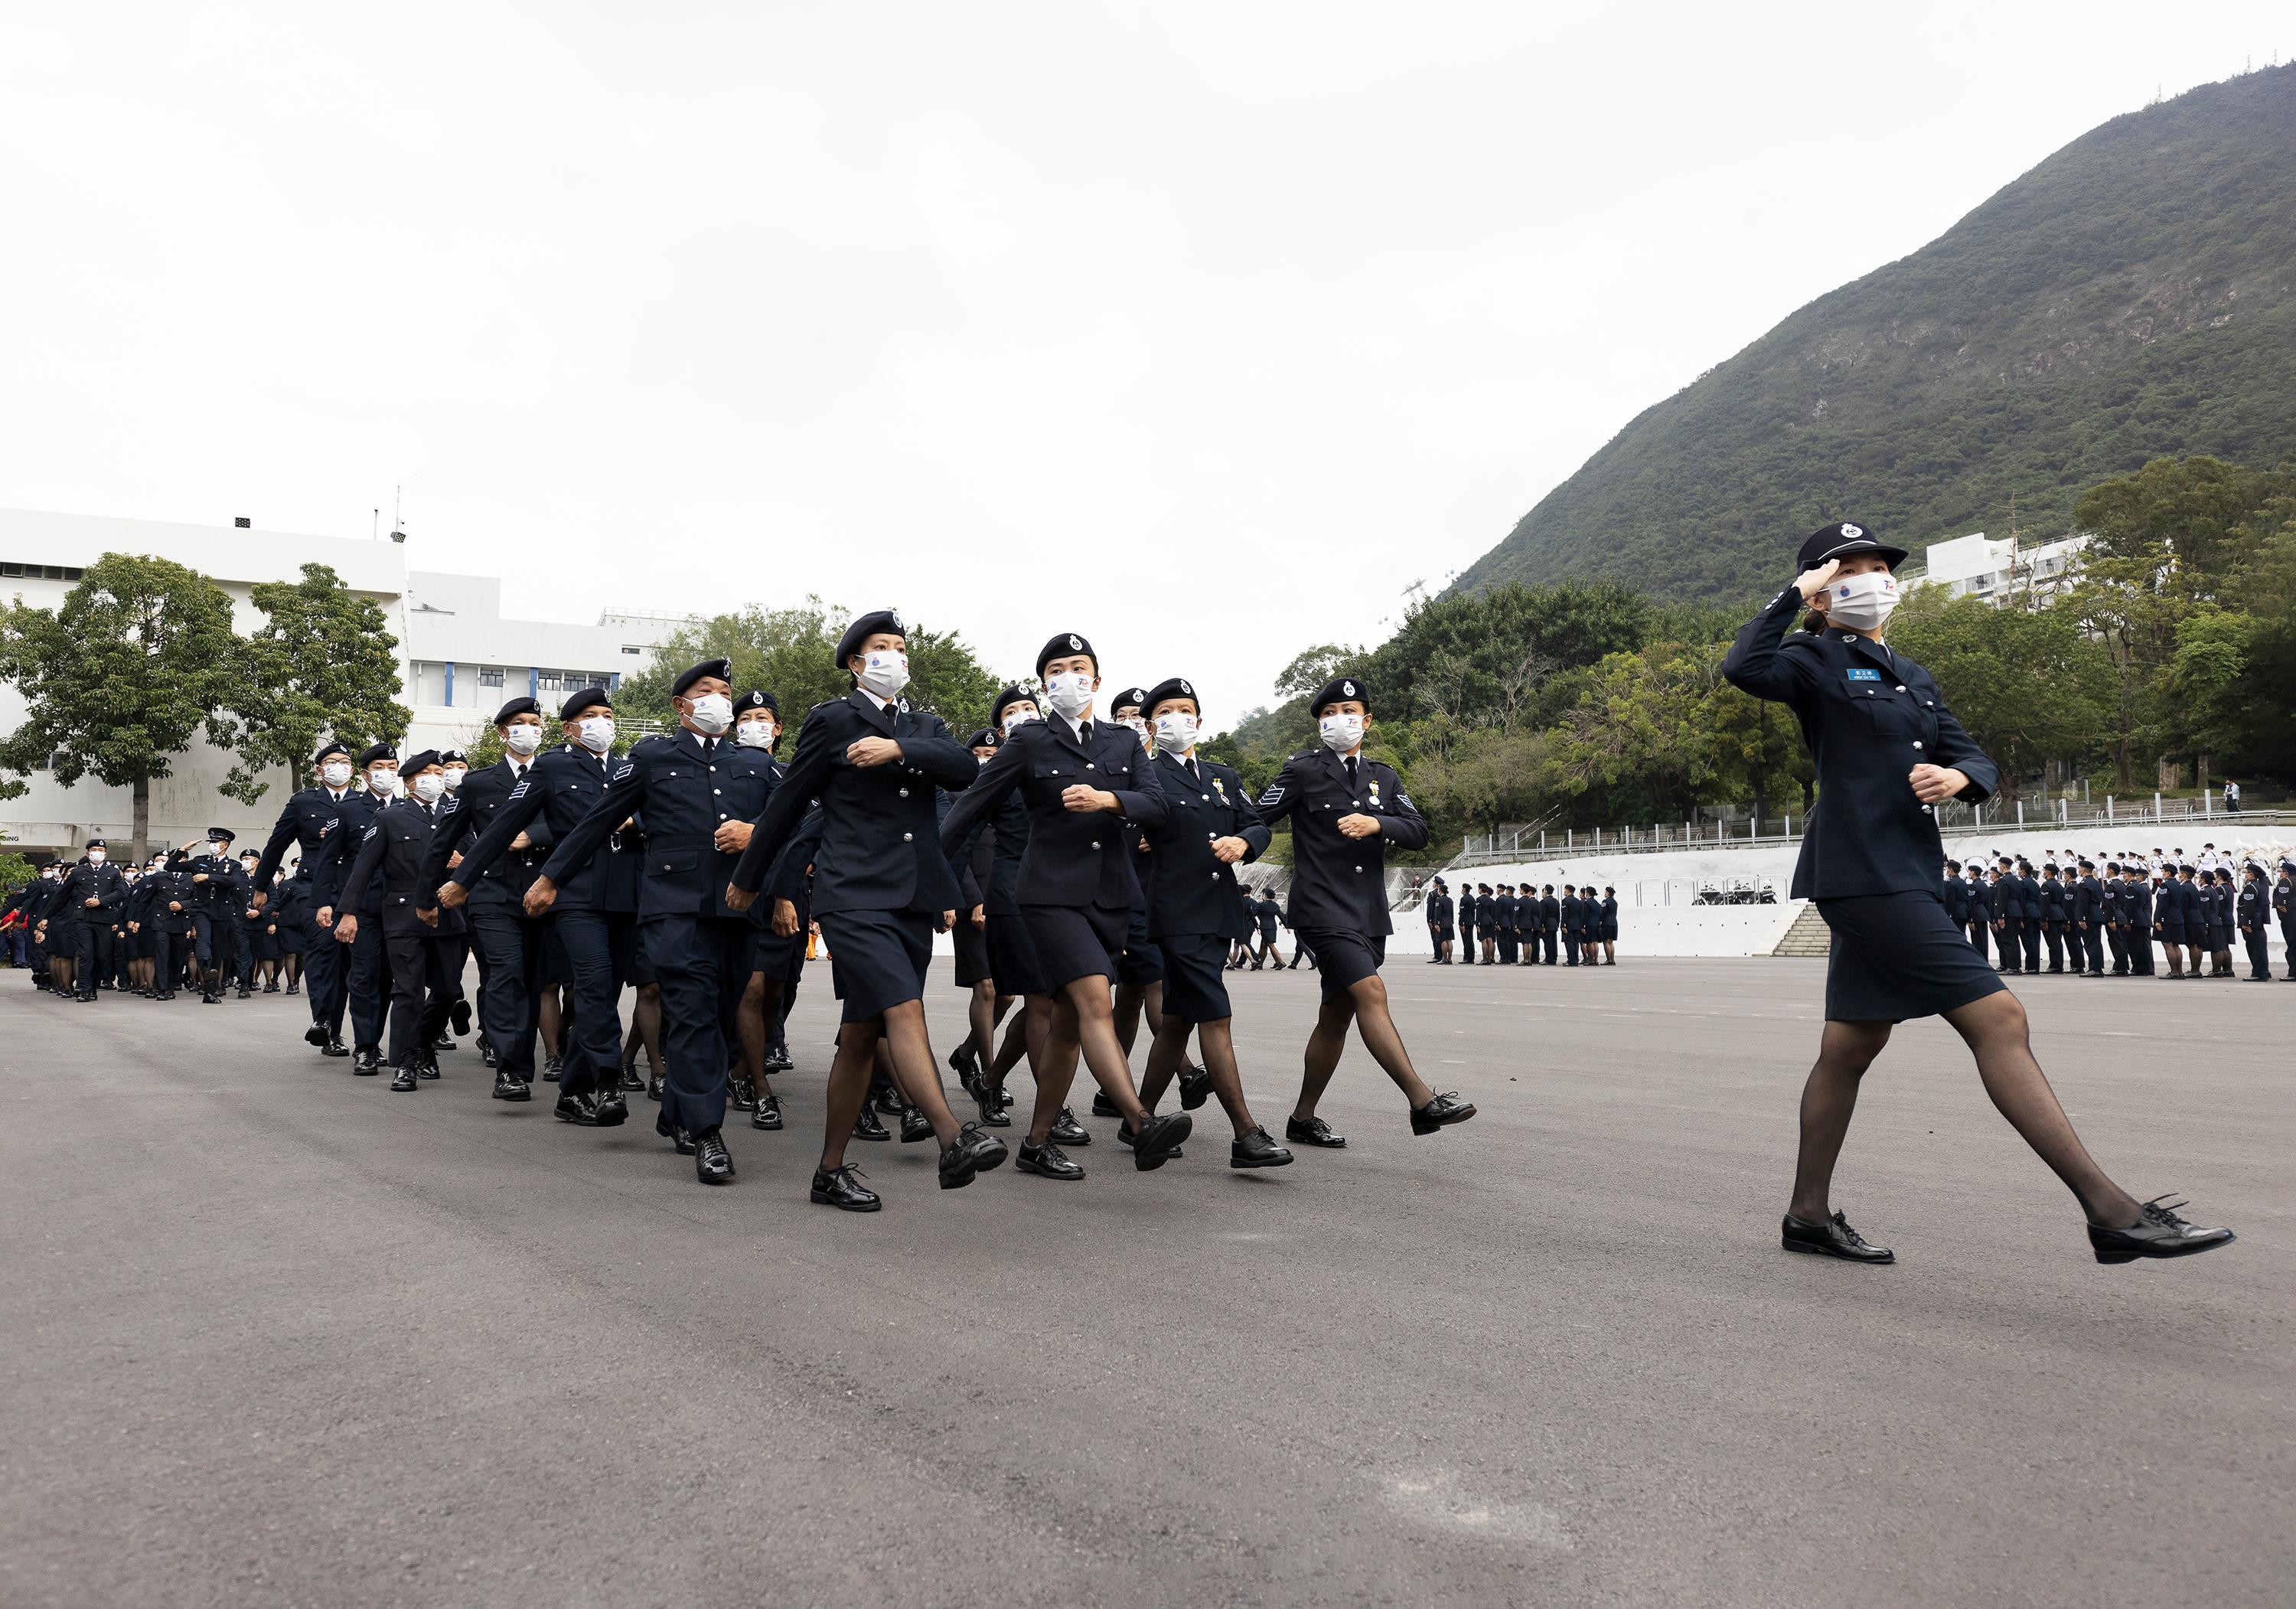 The Civil Aid Service (CAS) held the "Celebration of the 25th Anniversary of the Establishment of HKSAR and CAS 70th Anniversary Parade" today (November 27) at the Hong Kong Police College. Photo shows the CAS members performing the goose step, a characteristic of the Chinese-style foot drill, and marching with sonorous and vigorous steps.